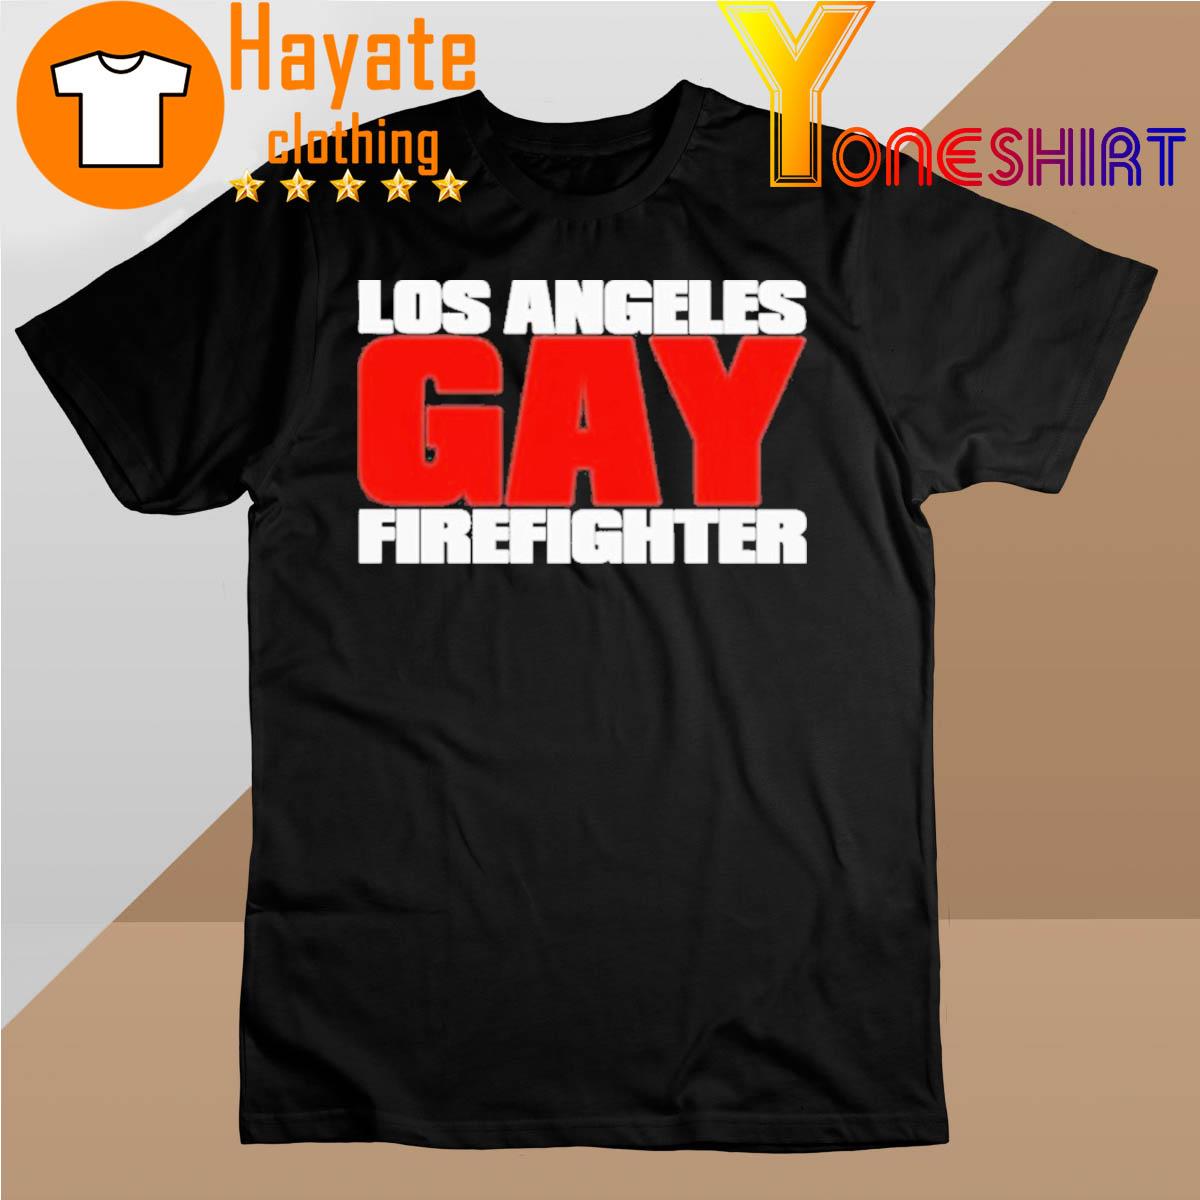 Los Angeles Gay Firefighter Shirt